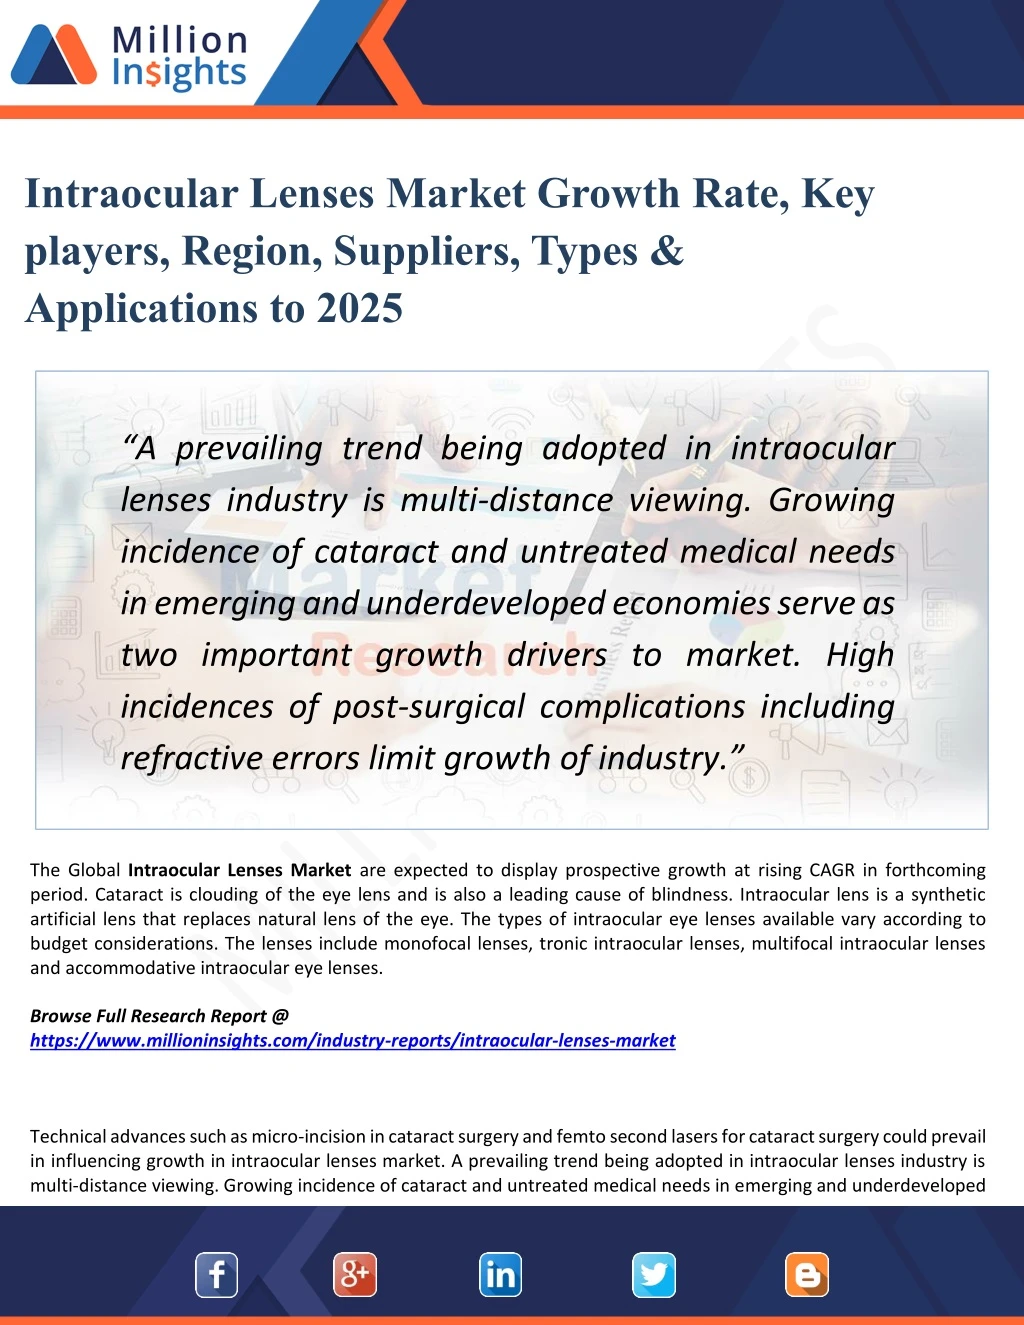 intraocular lenses market growth rate key players